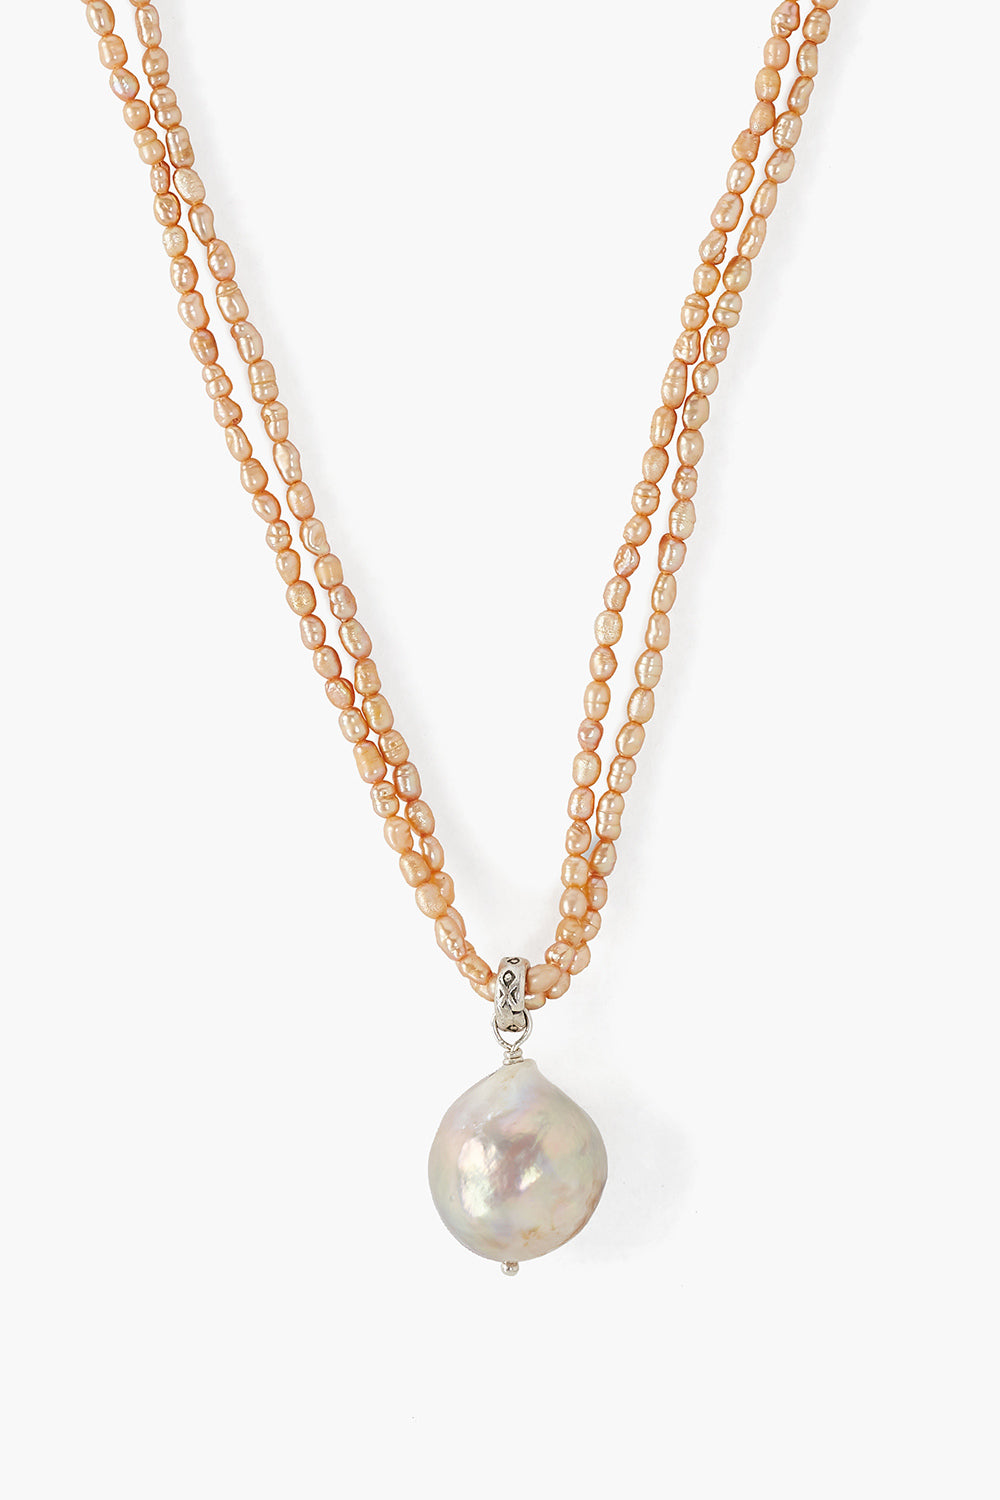 2 LAYER ADJUSTABLE PEARL CHARM NECKLACE - Kingfisher Road - Online Boutique